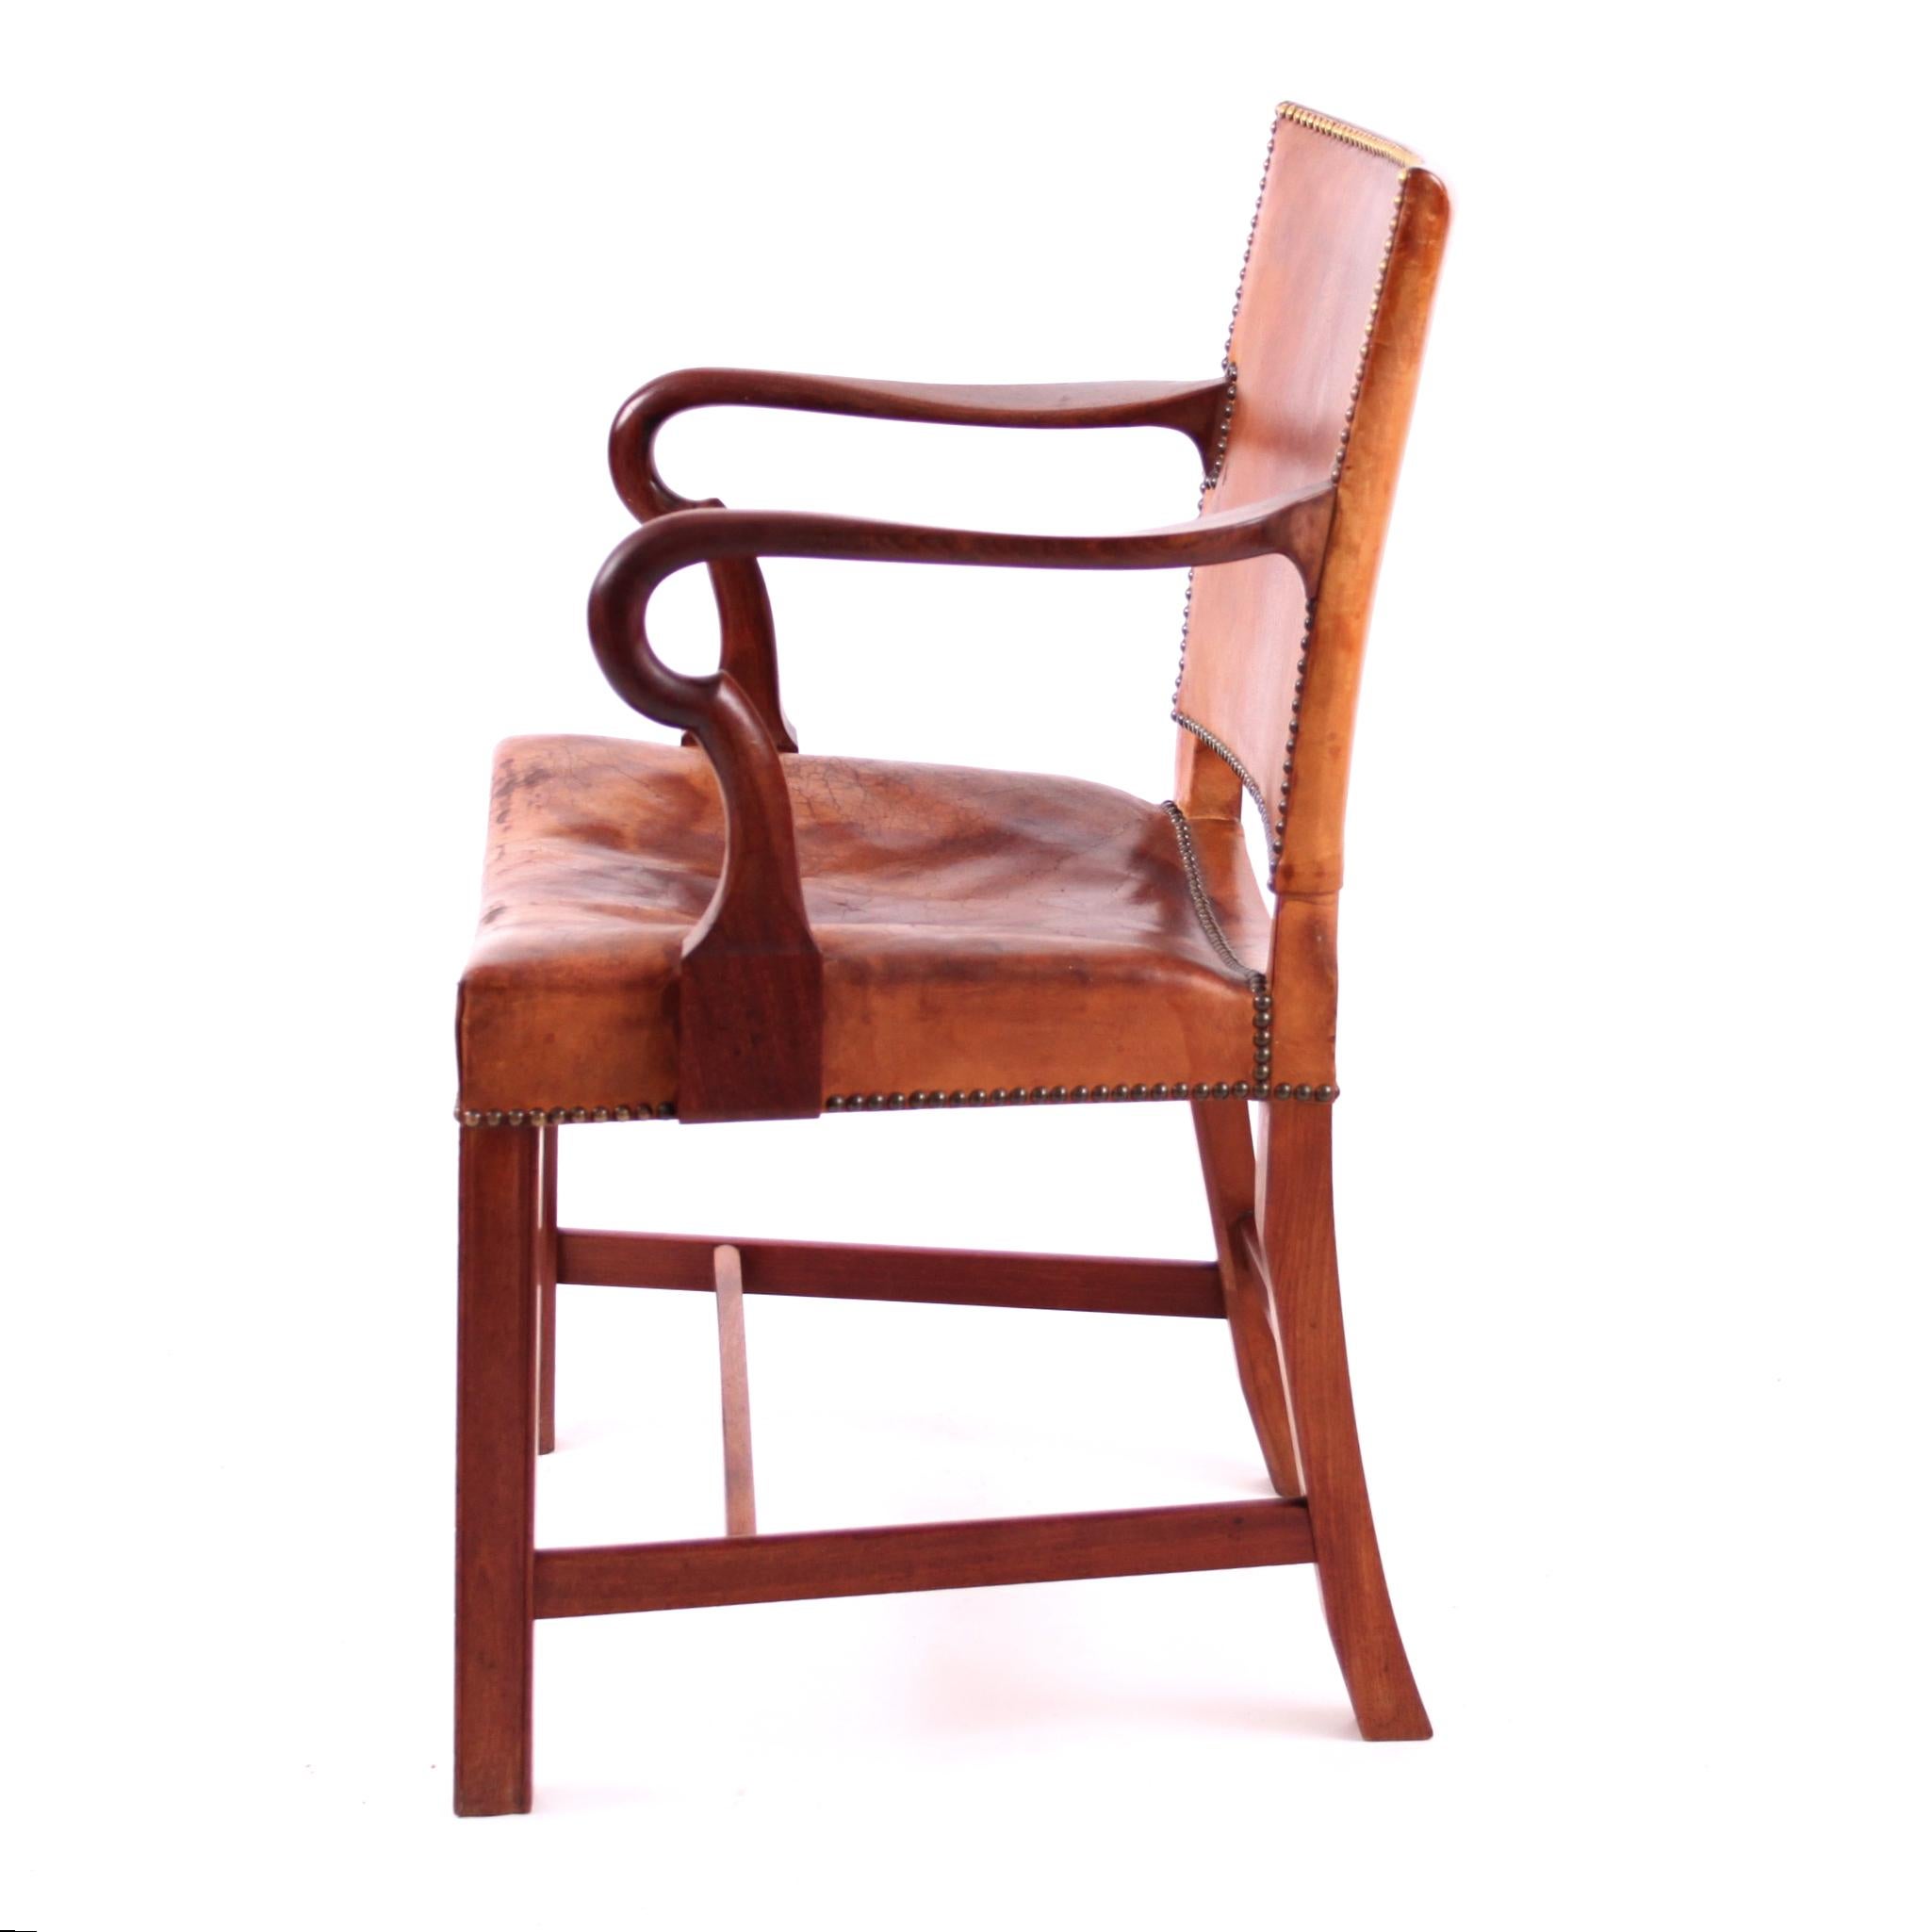 Kaare Klint & Ole Wanscher / Rud Rasmussen Snedkerier - Scandinavian Modern.

A rare and exceptional armchair. A fusion of two masters of Danish design: Kaare Klint, and his student and the later renowned designer, Ole Wanscher. The armchair is with